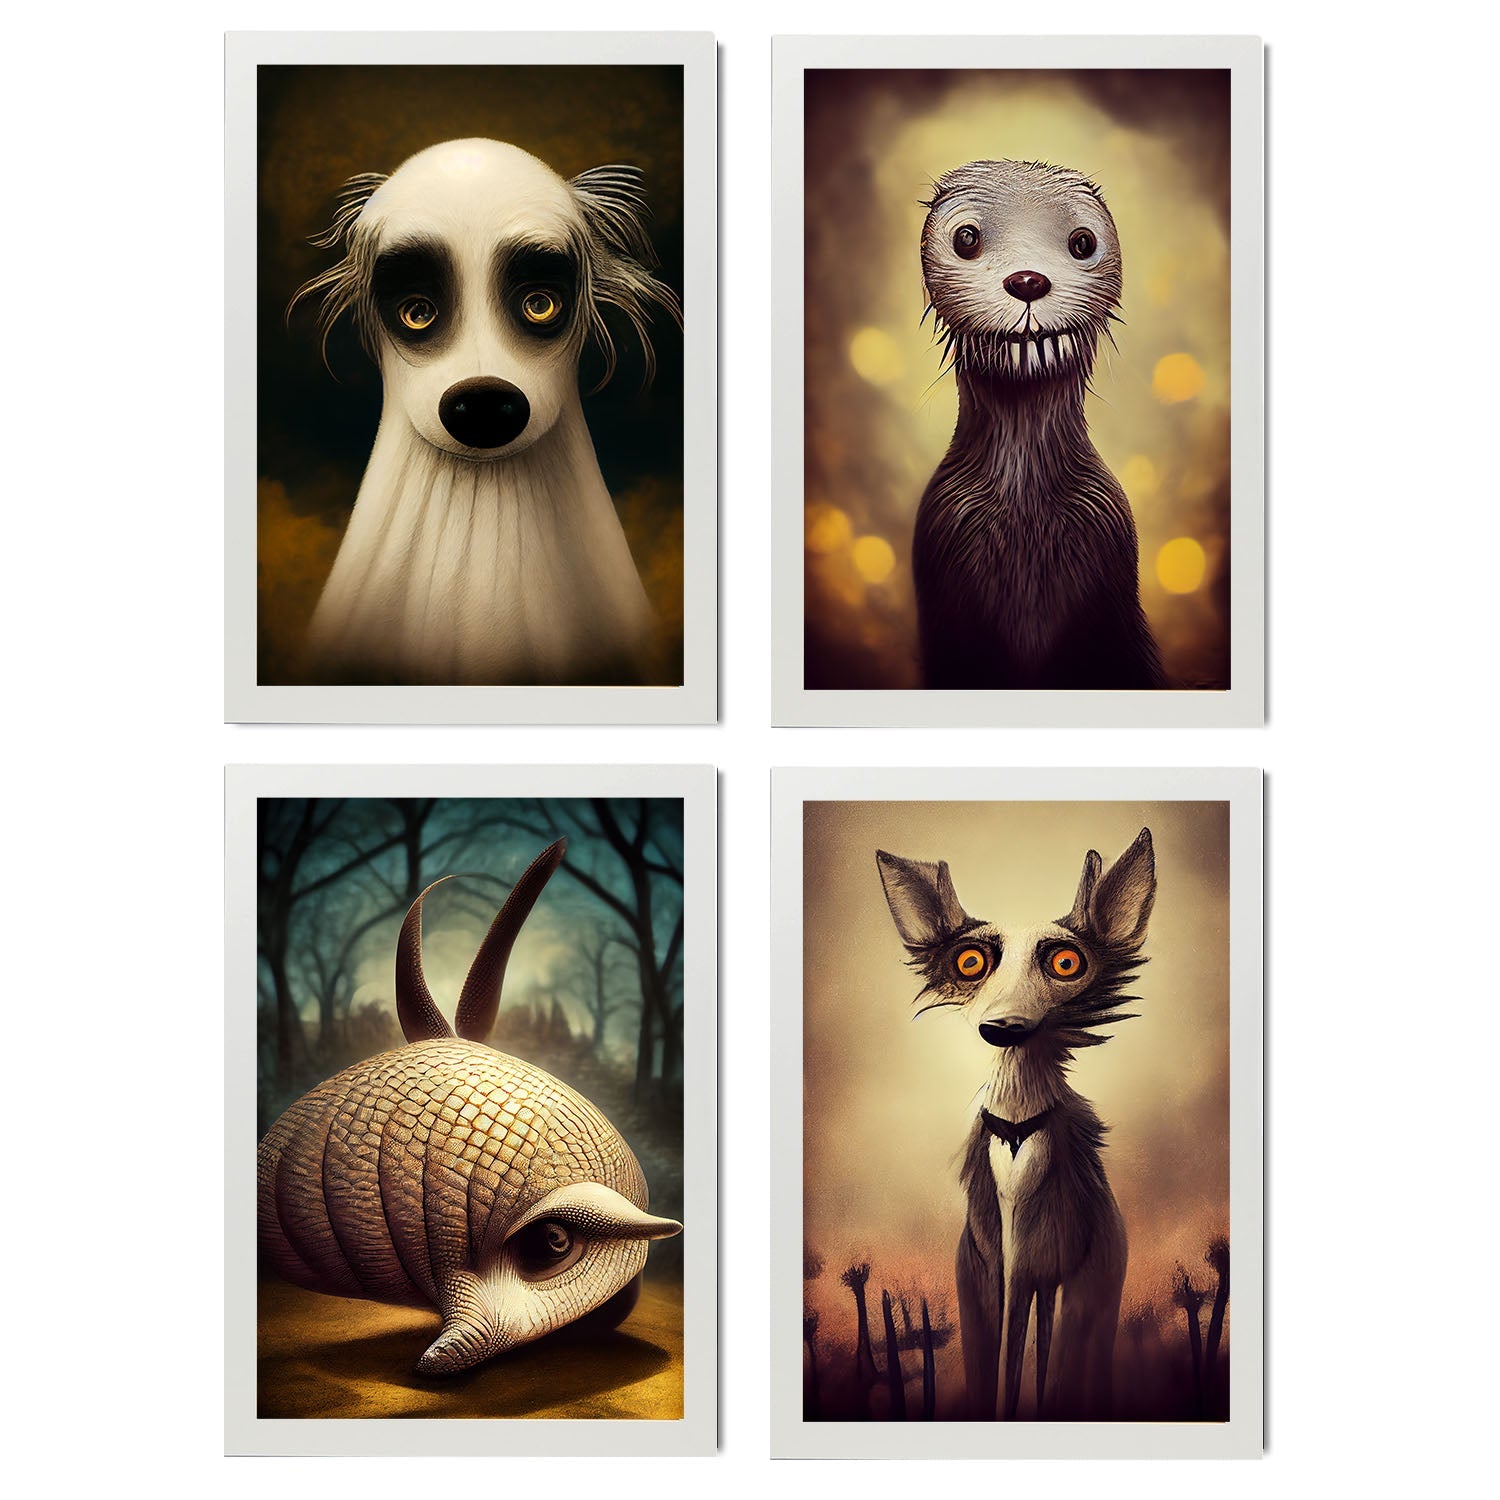 Burton style Animal Illustrations and Posters inspired by Burton's Dark and Goth art Interior Design and Decoration Set Collection 8-Artwork-Nacnic-A4-Marco Blanco-Nacnic Estudio SL